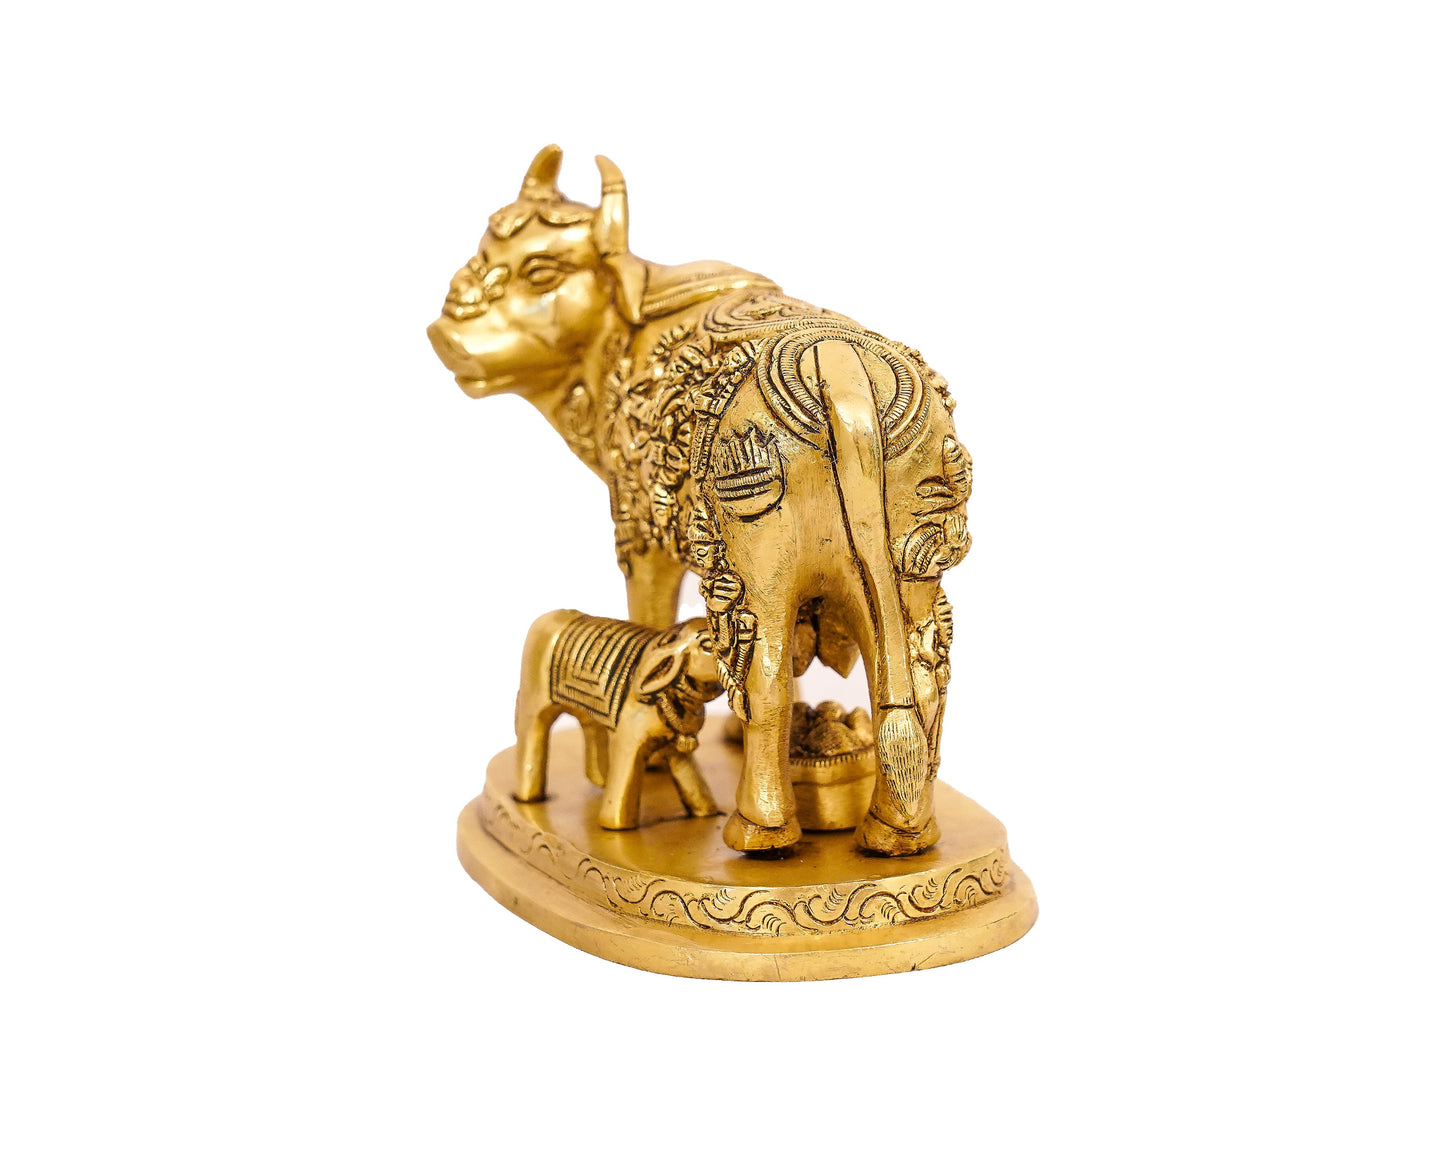 Nandi Statue Brass Material For Puja, Home, Decor, Office, Showpiece, Gifts by Pooja Bazar 3.5 X 5 X 5 In